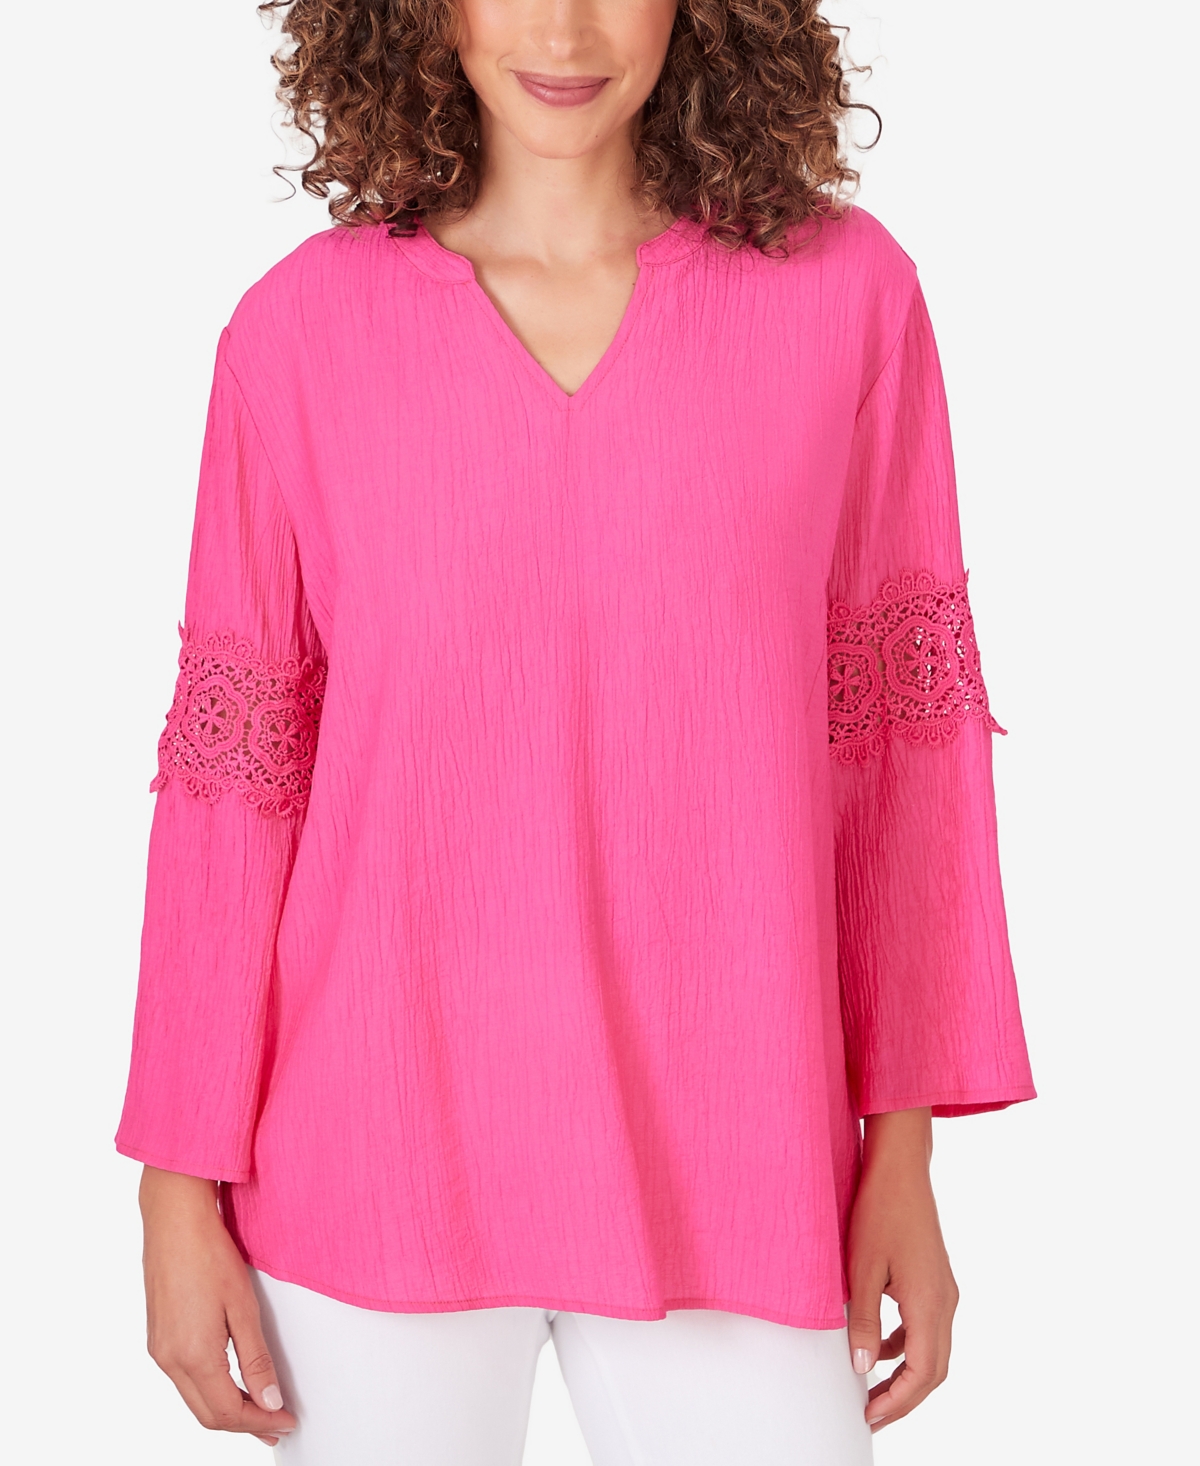 Petite Lace-Embellished Top - Raspberry